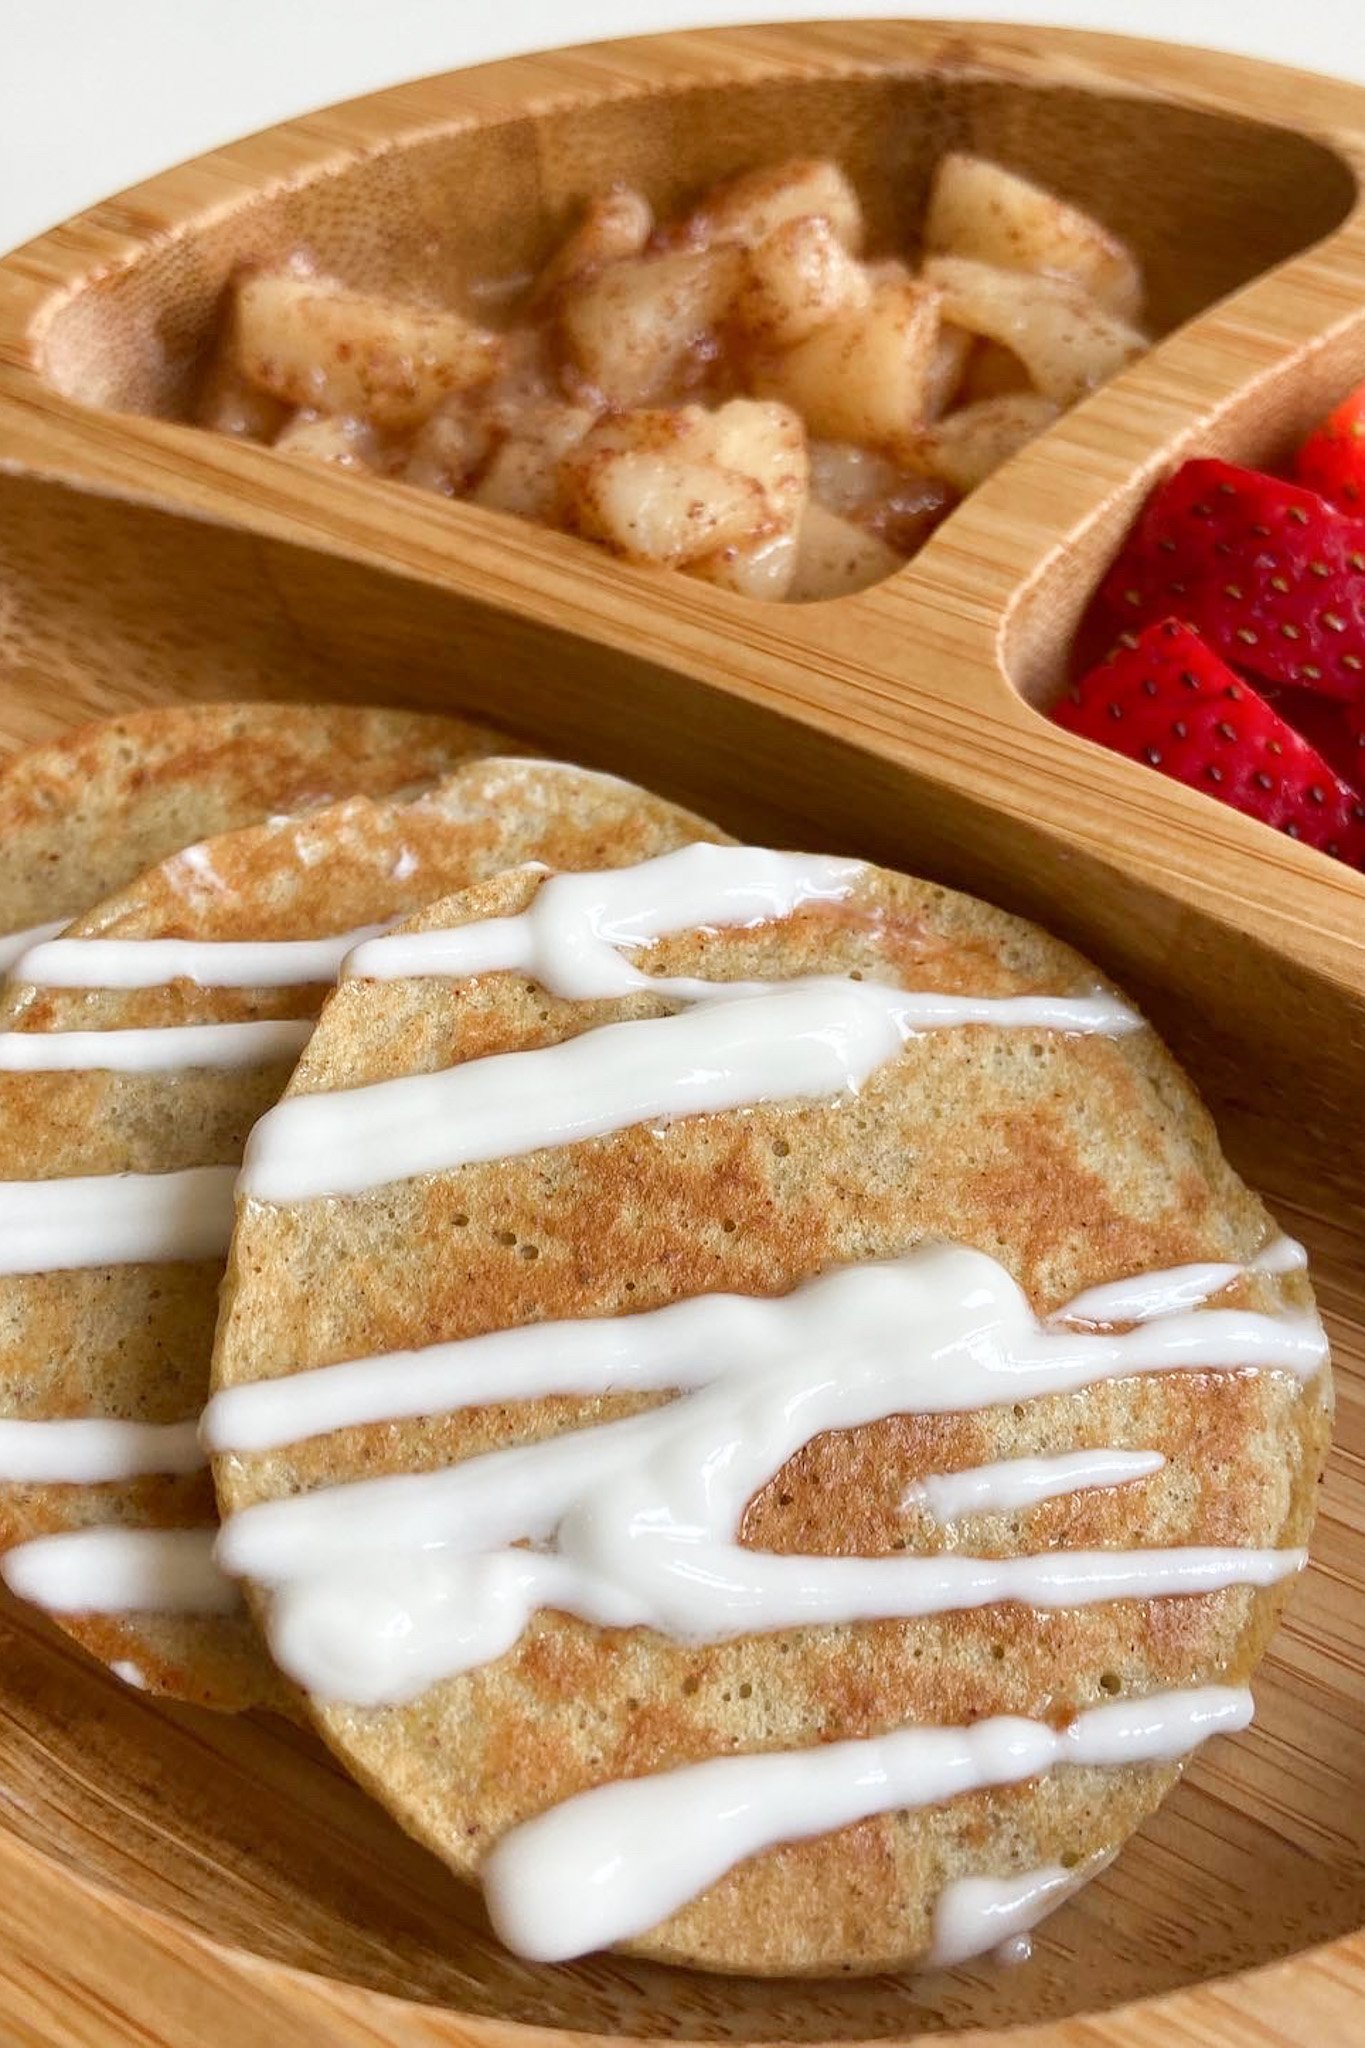 Pear pancakes drizzled with yogurt. Served with cinnamon pears and strawberries